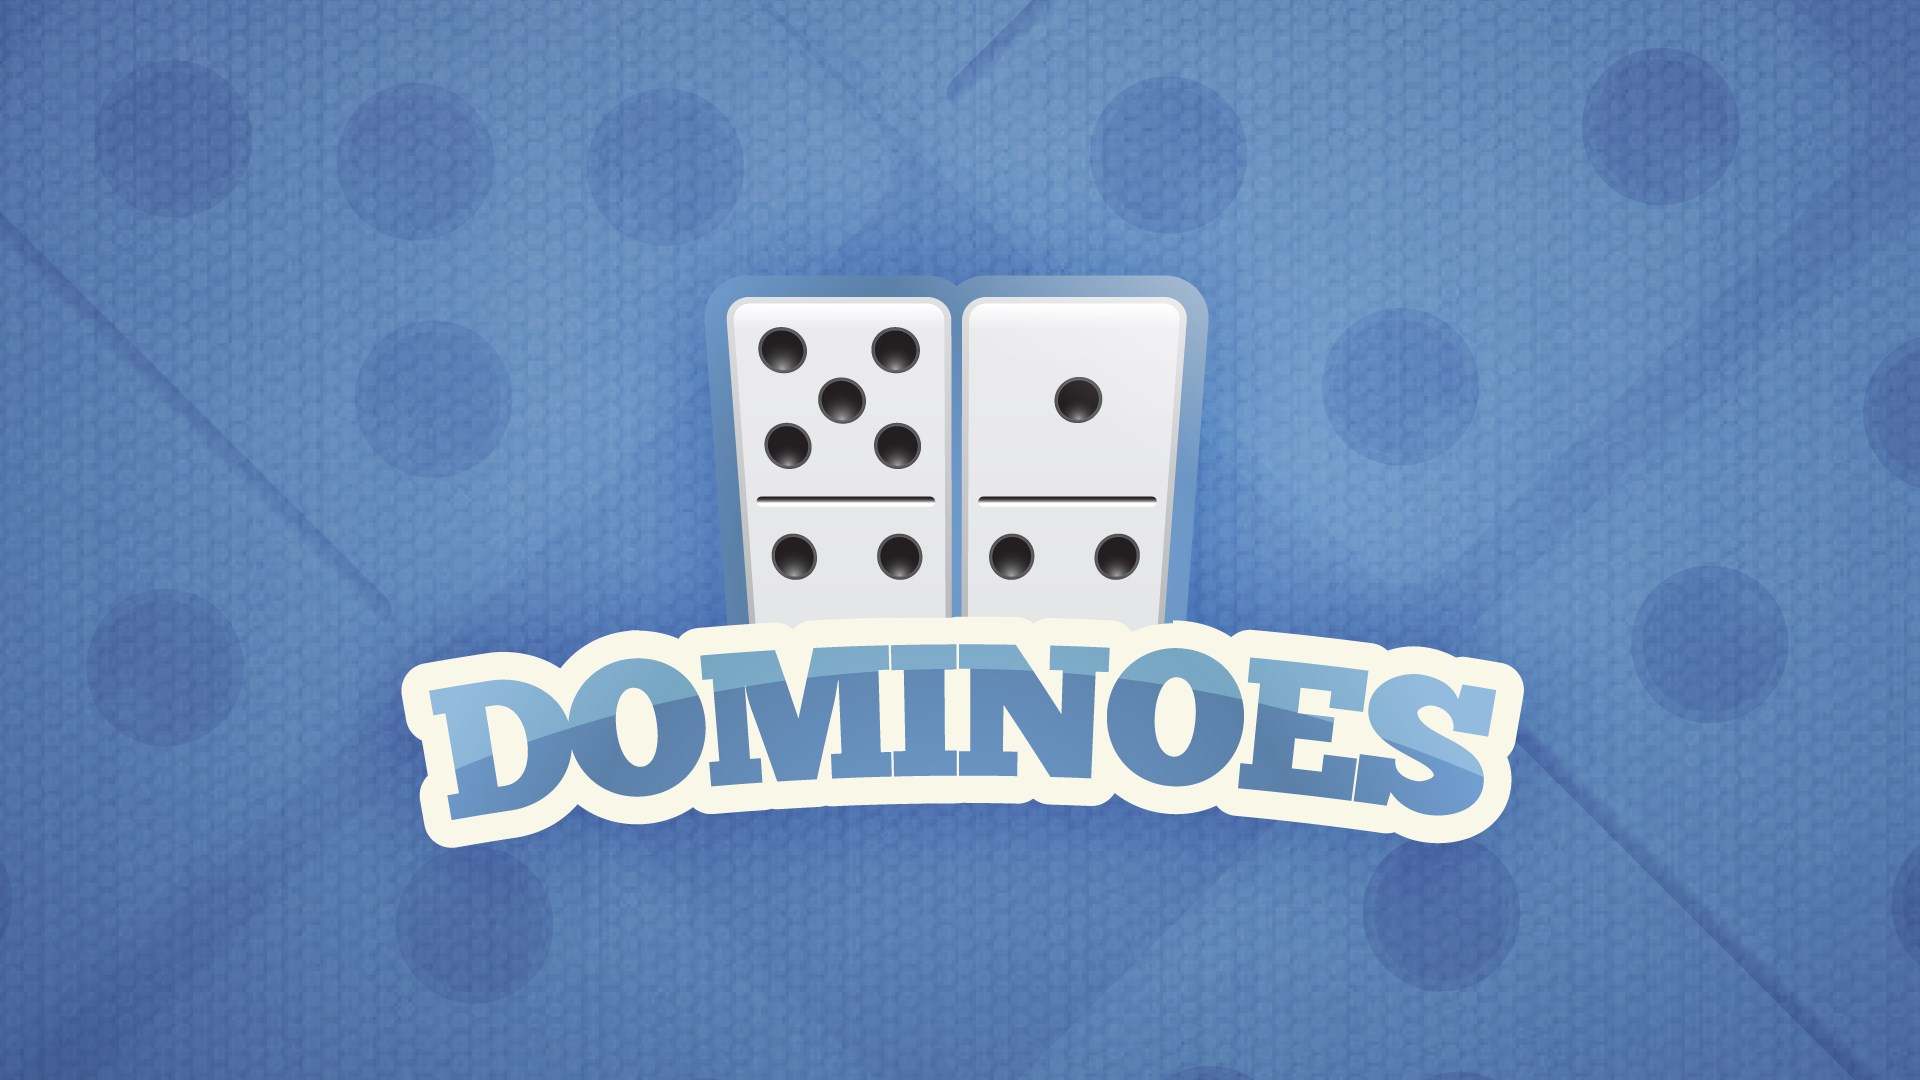 3 Ways To Play Dominoes - Draw, Block, Muggins — Gather Together Games